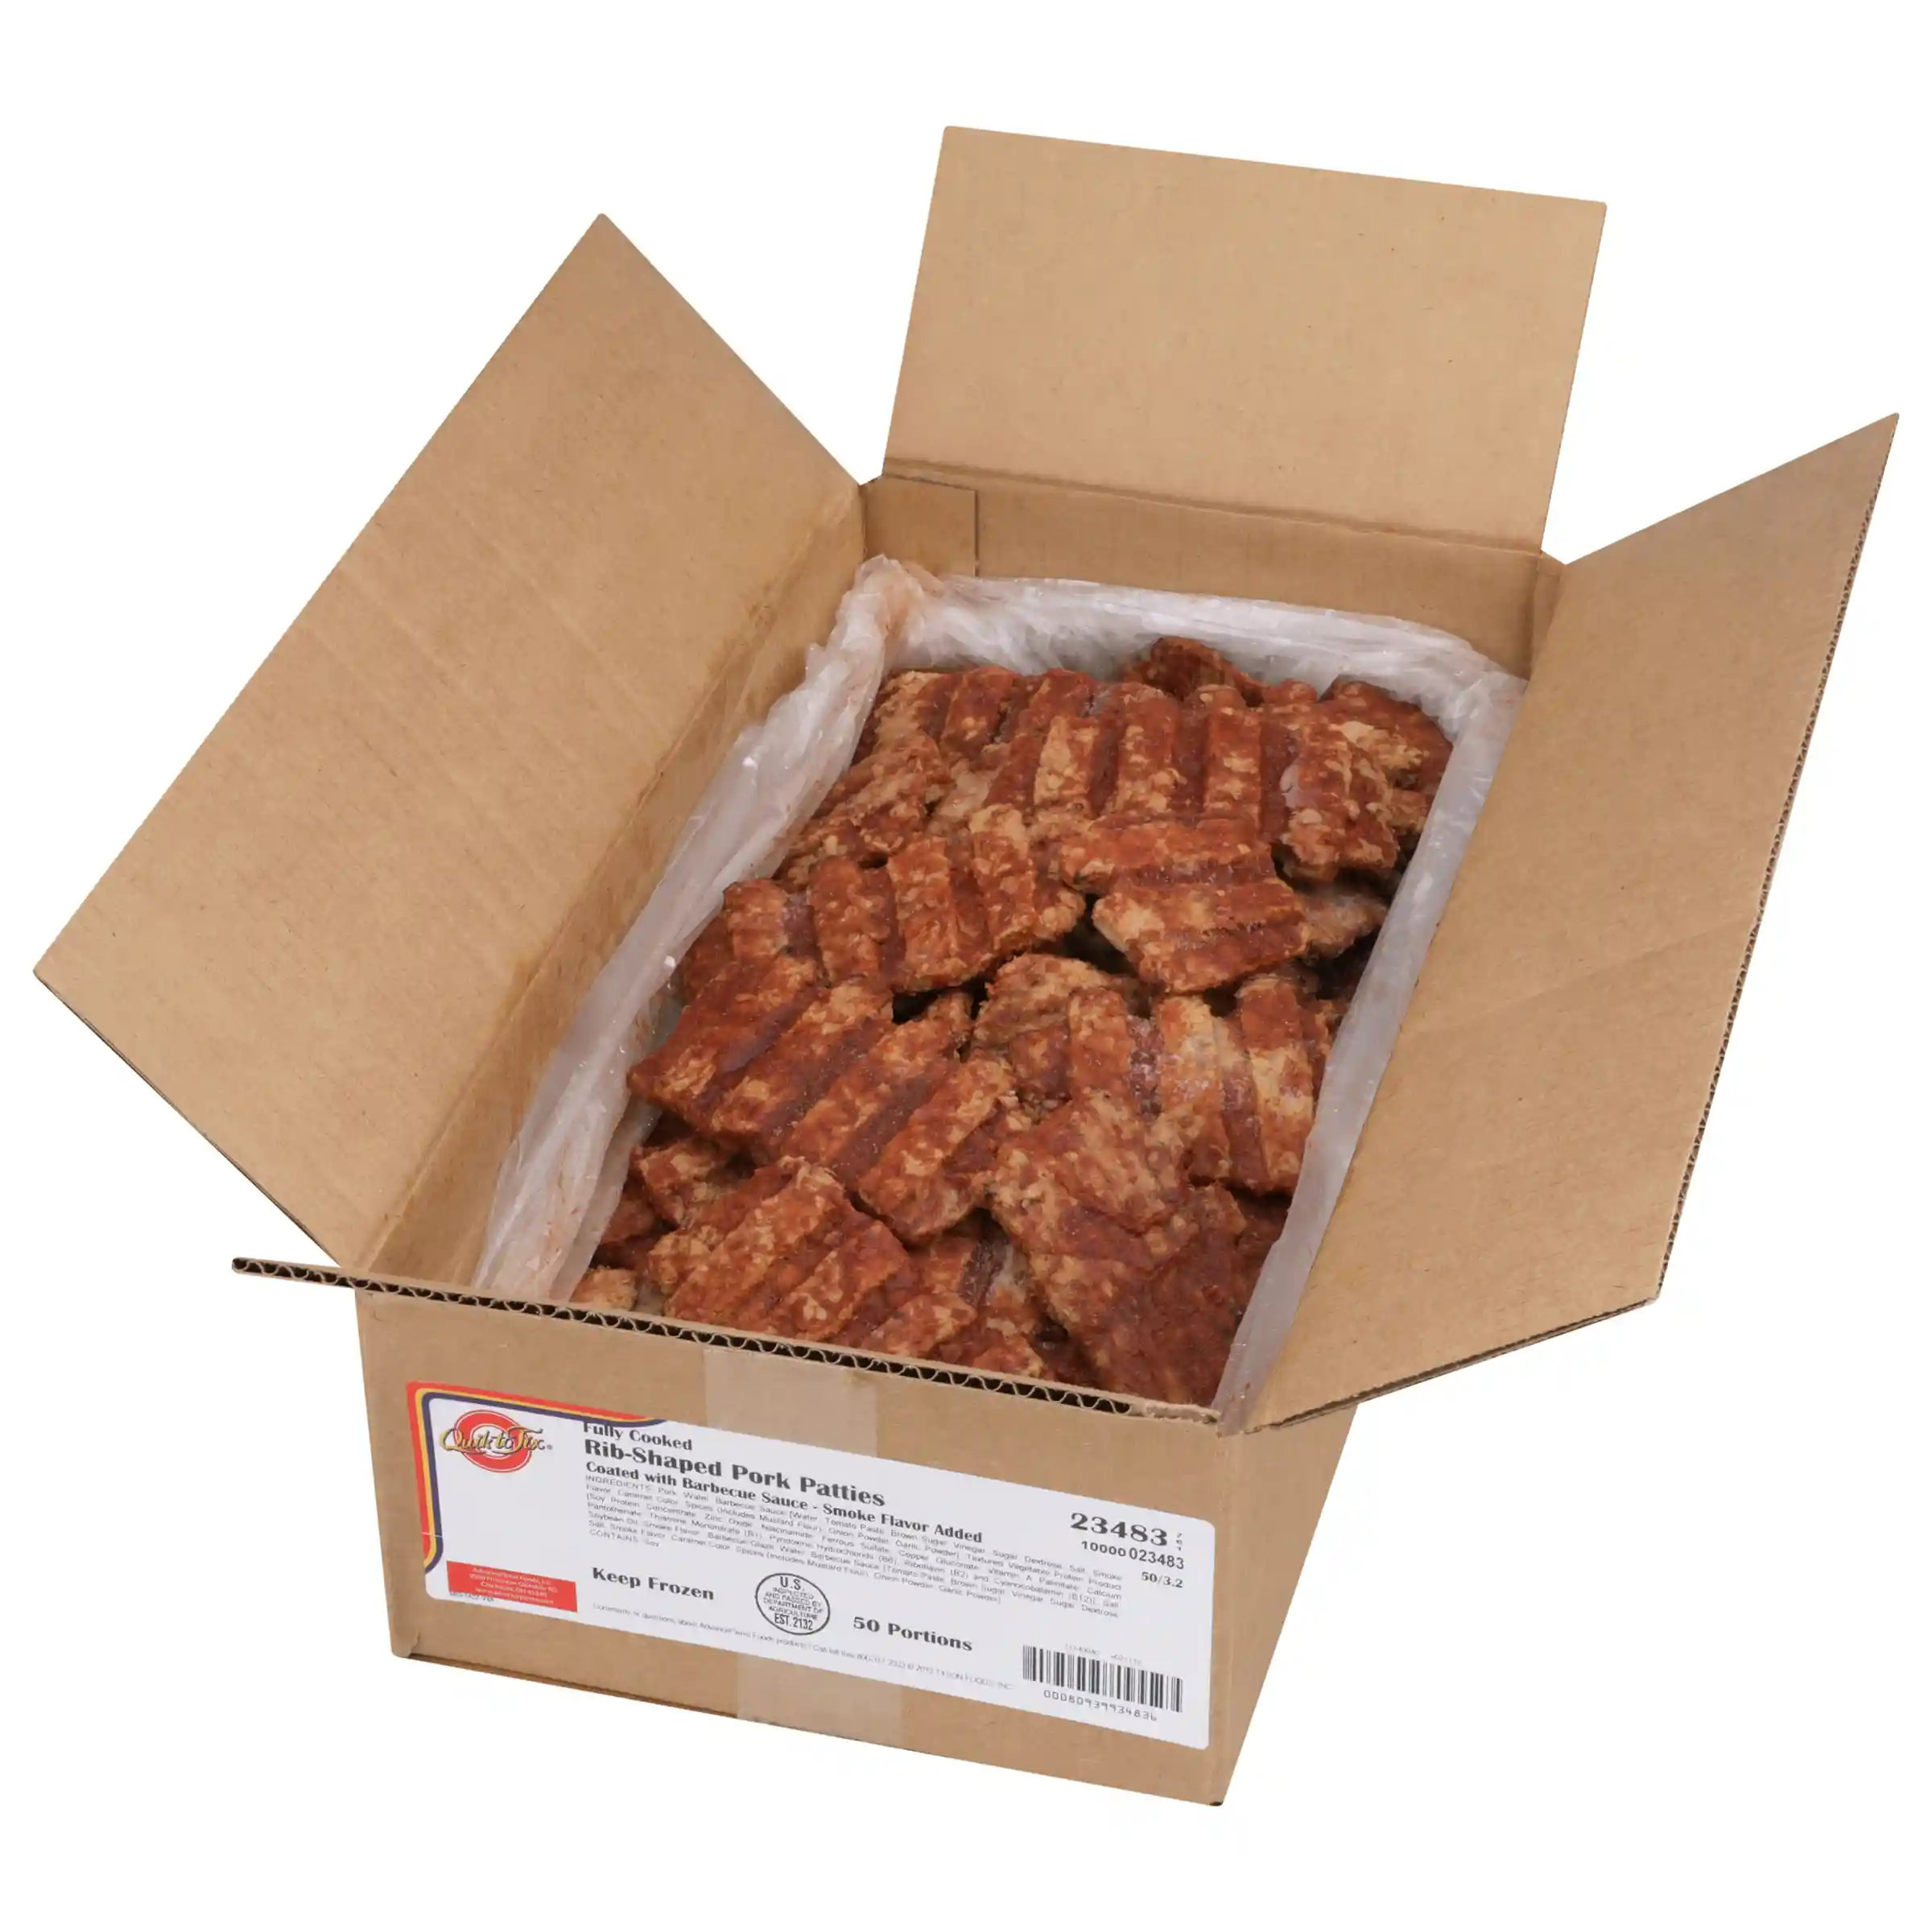 Quik-To-Fix® Fully Cooked Rib-Shaped Pork Patties, Coated with BBQ Sauce_image_31